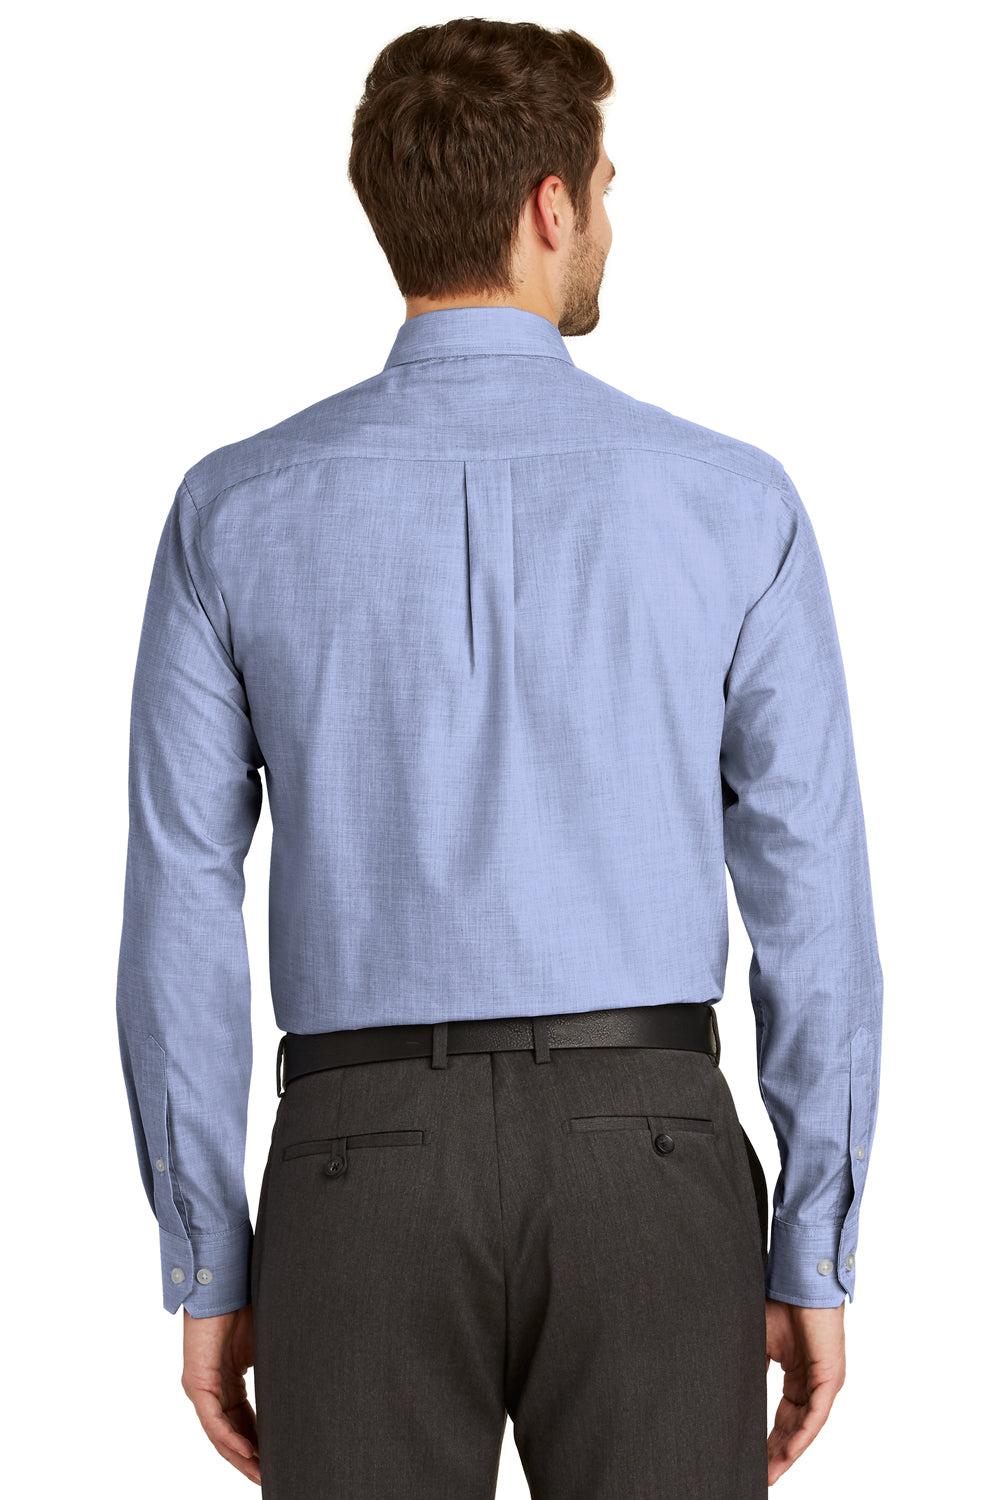 Port Authority S640 Mens Easy Care Wrinkle Resistant Long Sleeve Button Down Shirt w/ Pocket Chambray Blue Back